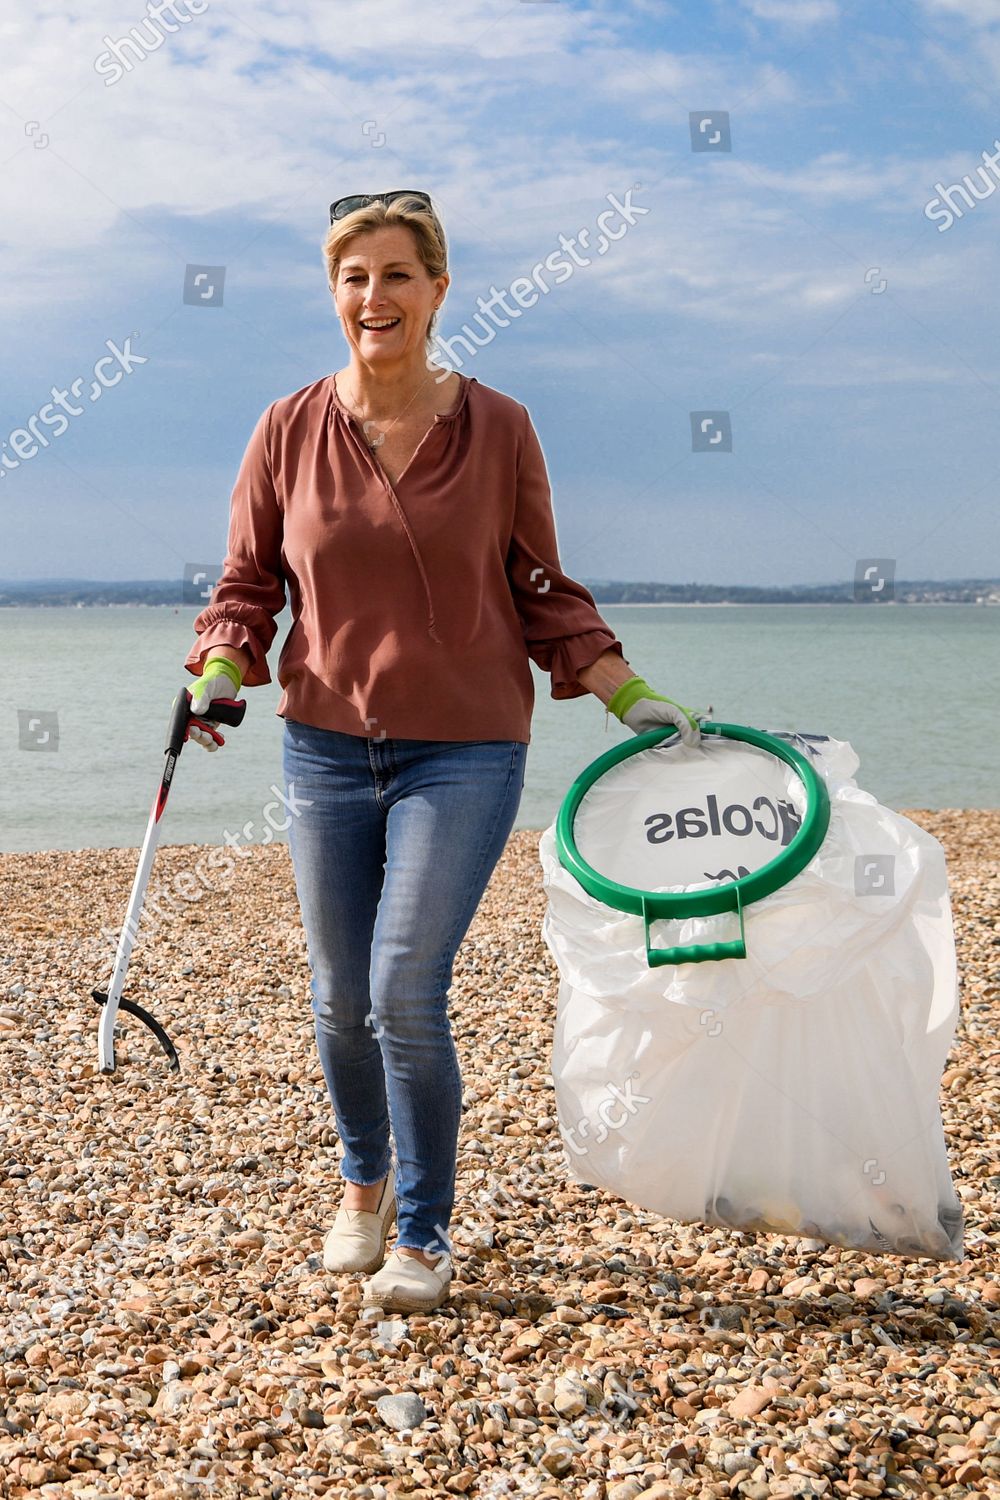 prince-edward-and-sophie-countess-of-wessex-great-british-beach-clean-southsea-beach-portsmouth-uk-shutterstock-editorial-10782998af.jpg